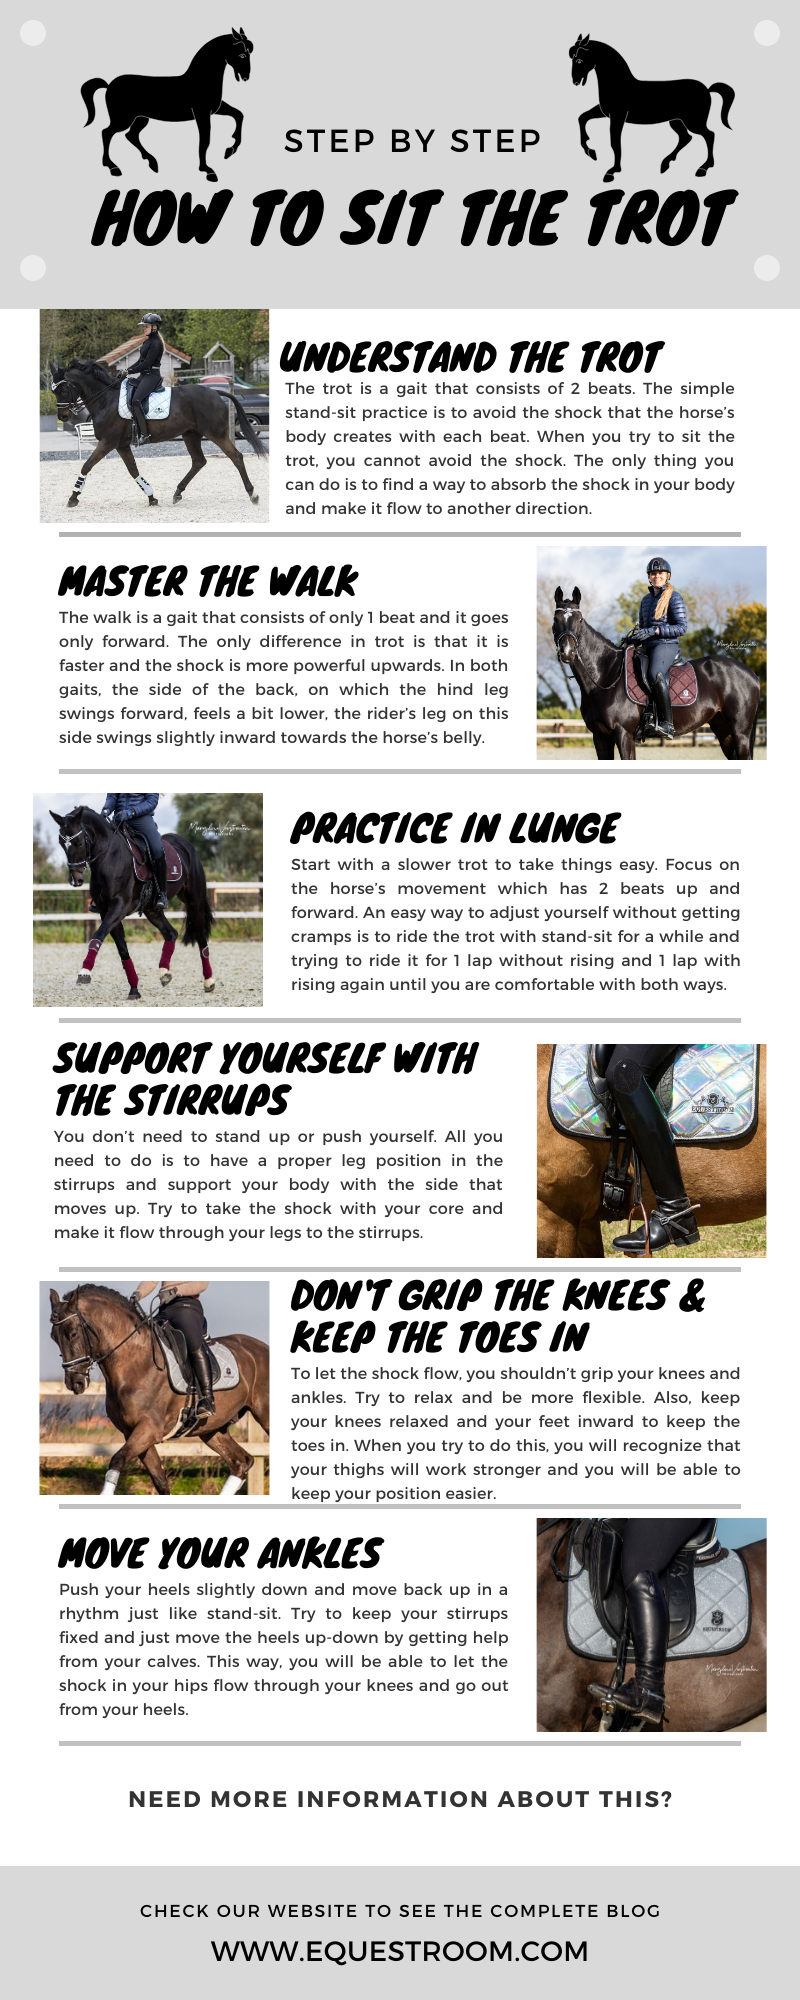 How To Sit the Trot by Equestroom Infographics